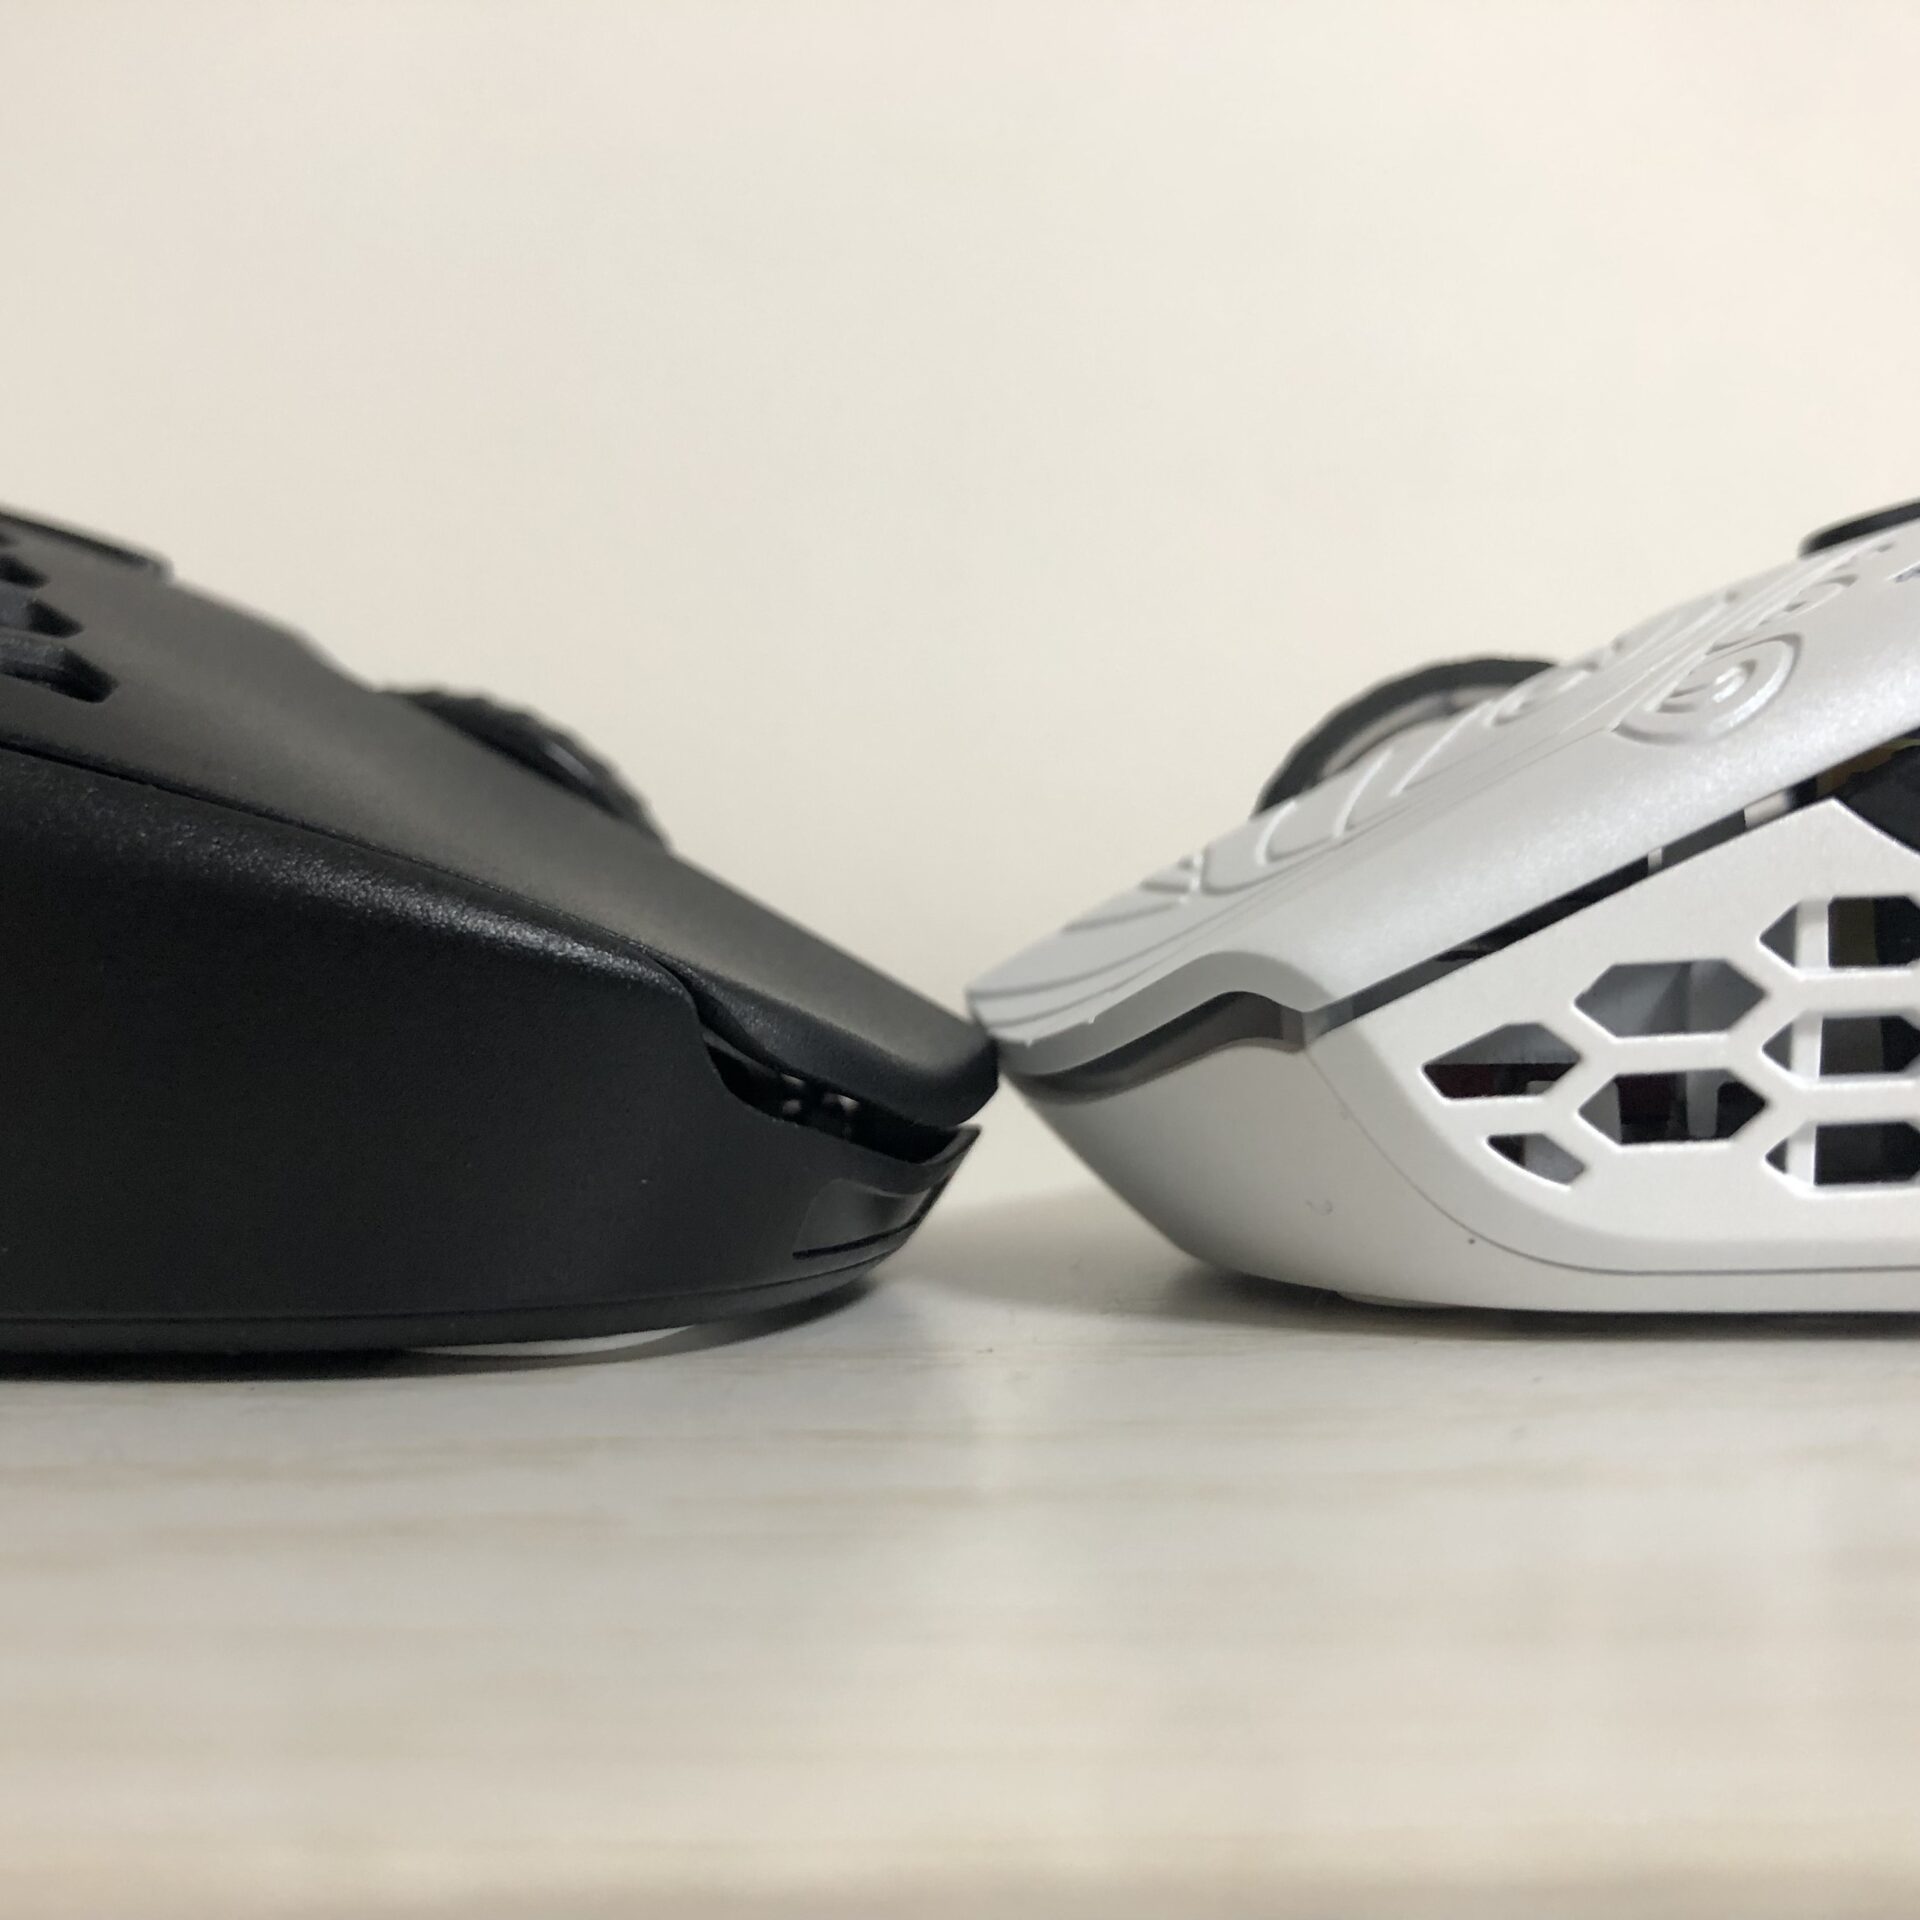 gwolves htx and finalmouse